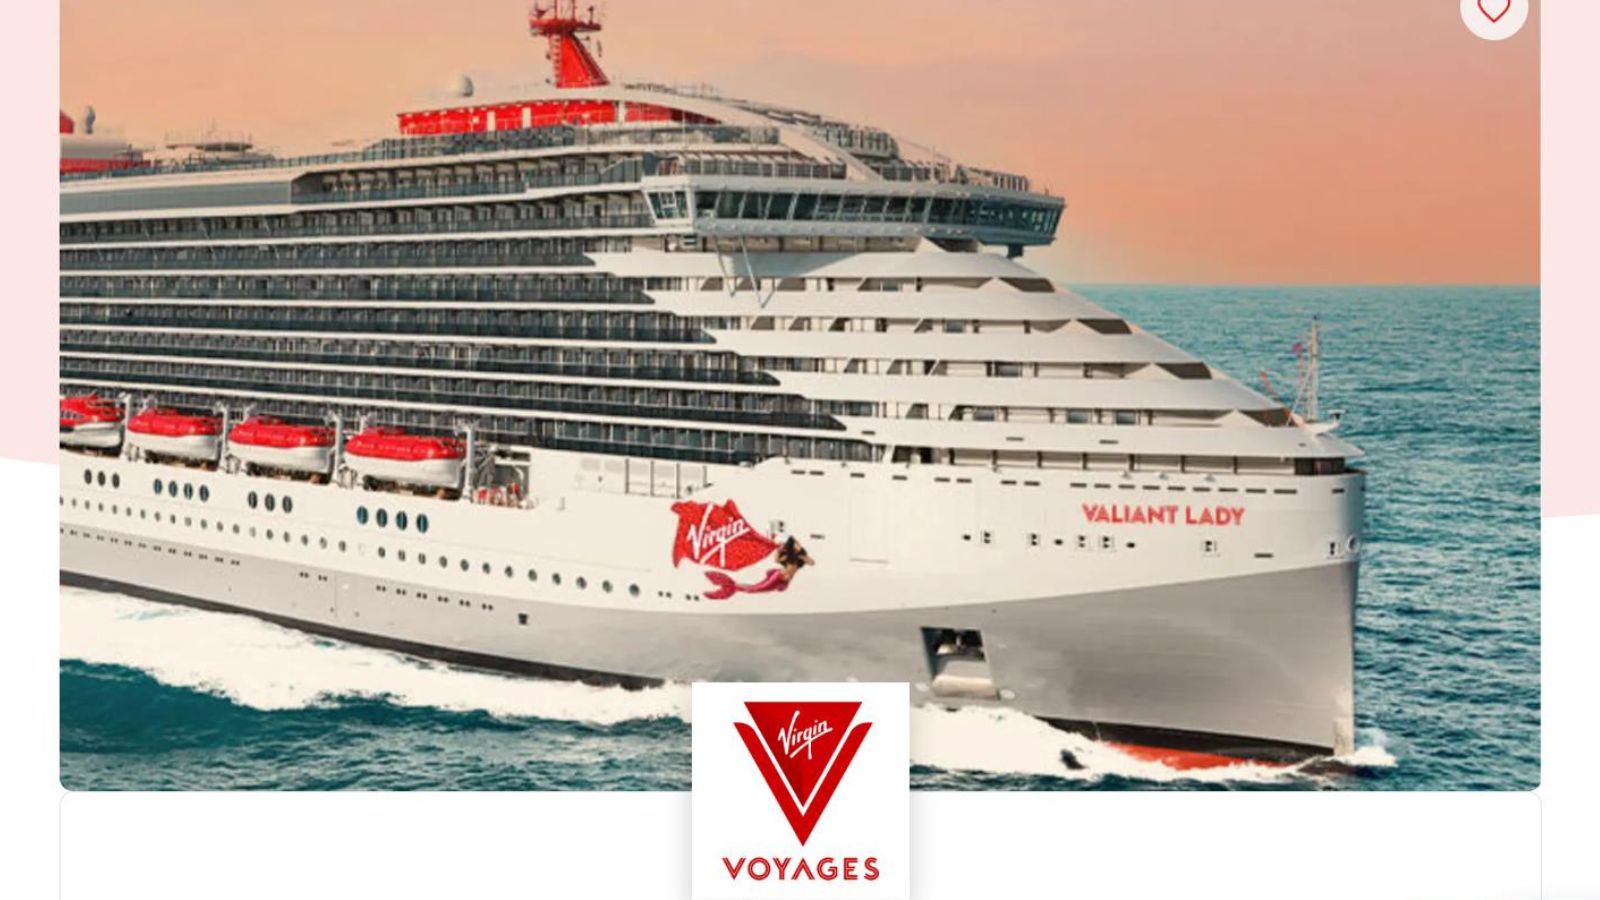 Virgin Red Caribbean or Mediterranean cruise for 2 people for 110k